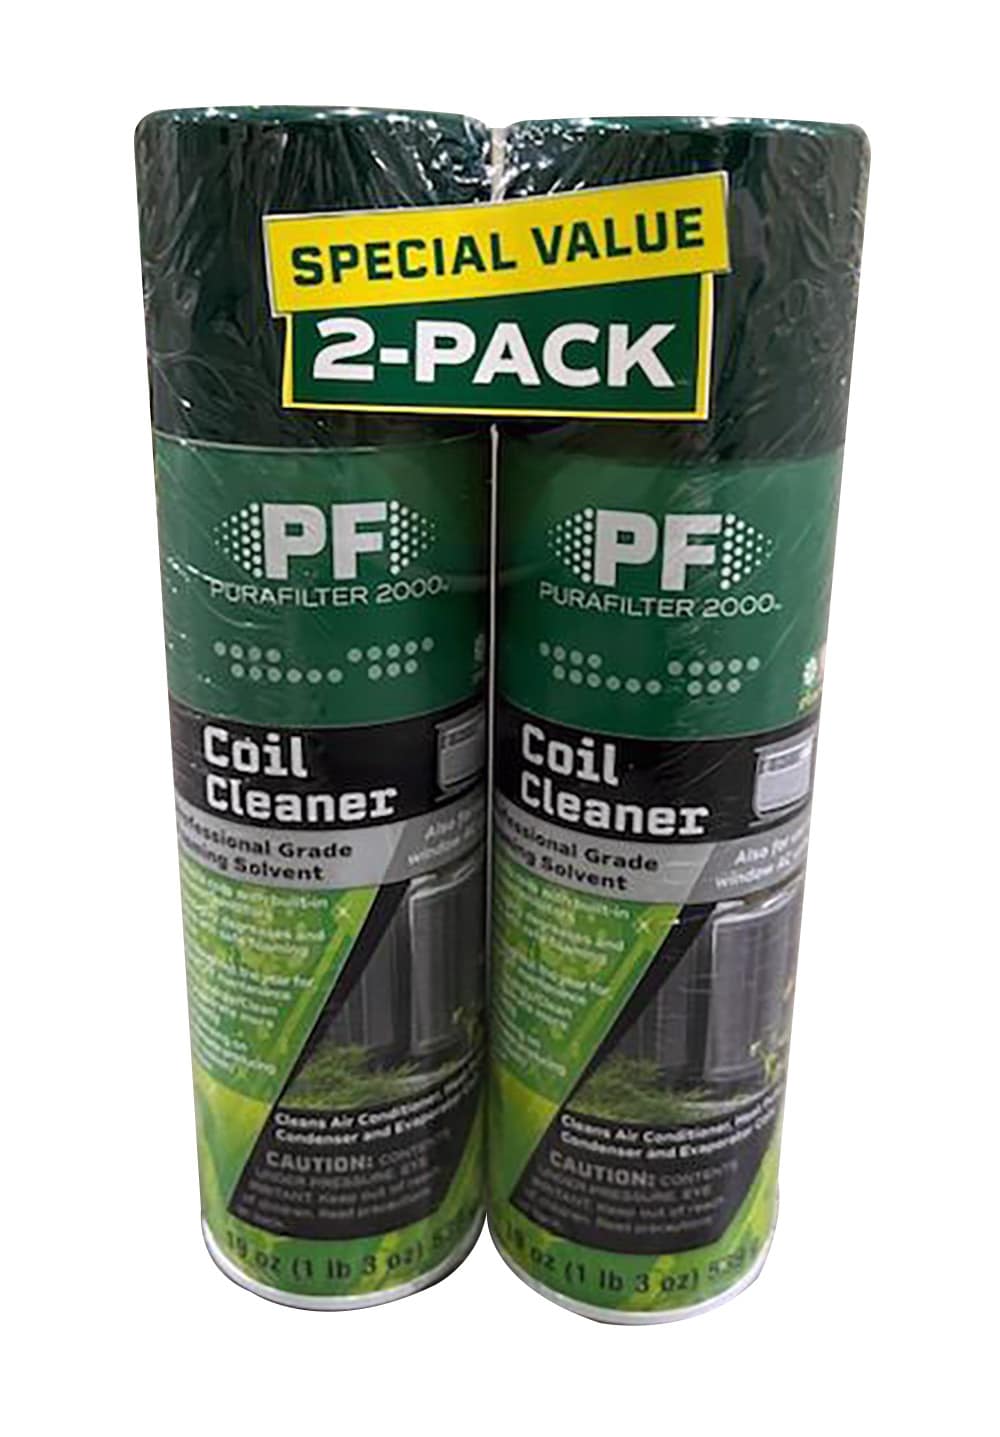 Purafilter Foam Coil Cleaner - Professional Grade Solvent for